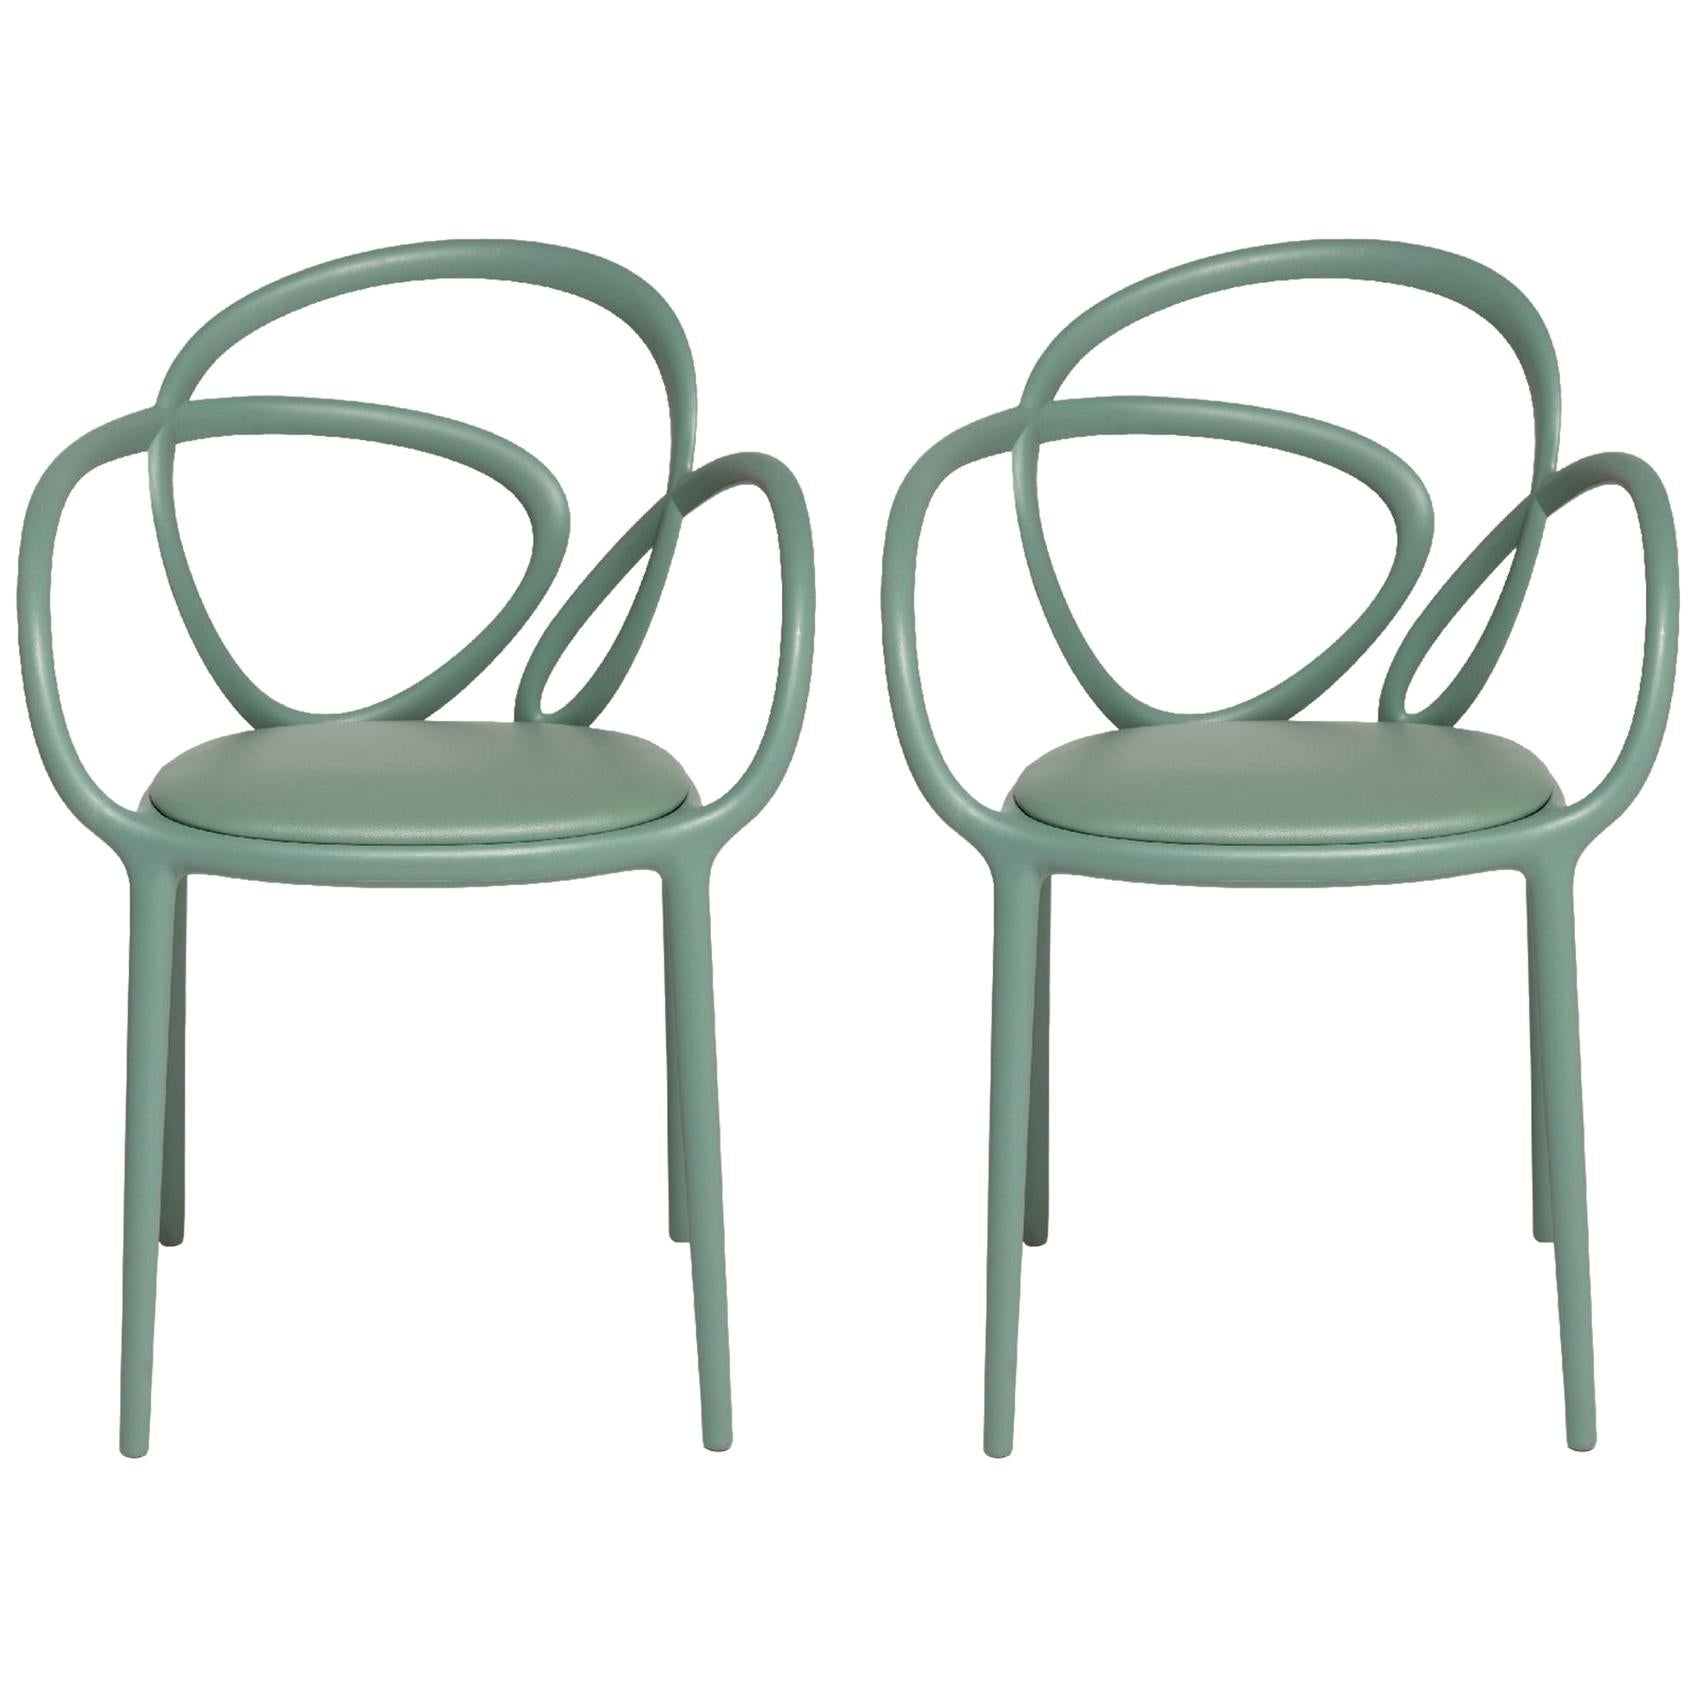 Set of 2 Sage Green Loop Padded Armchair, Made in Italy